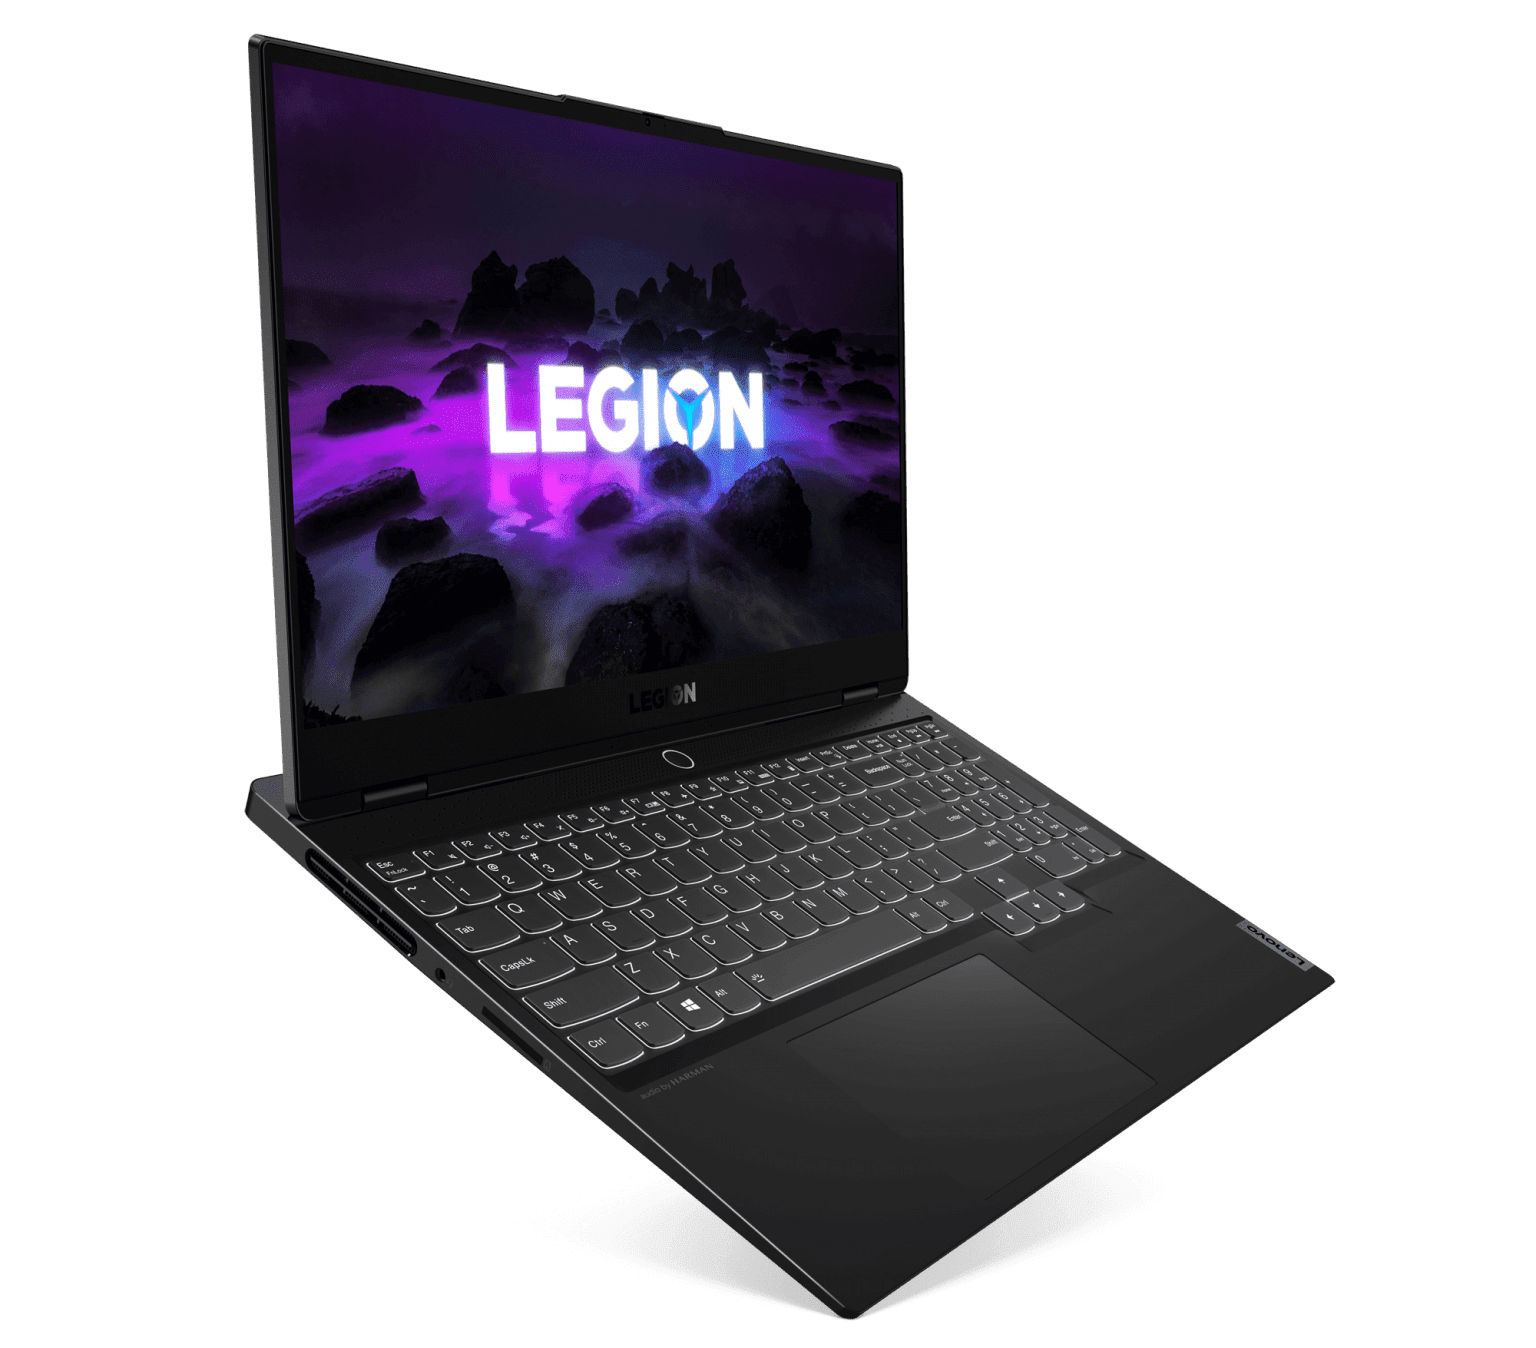 Lenovo Legion Goes All Out with New Futuristic Gaming Machines Lenovo